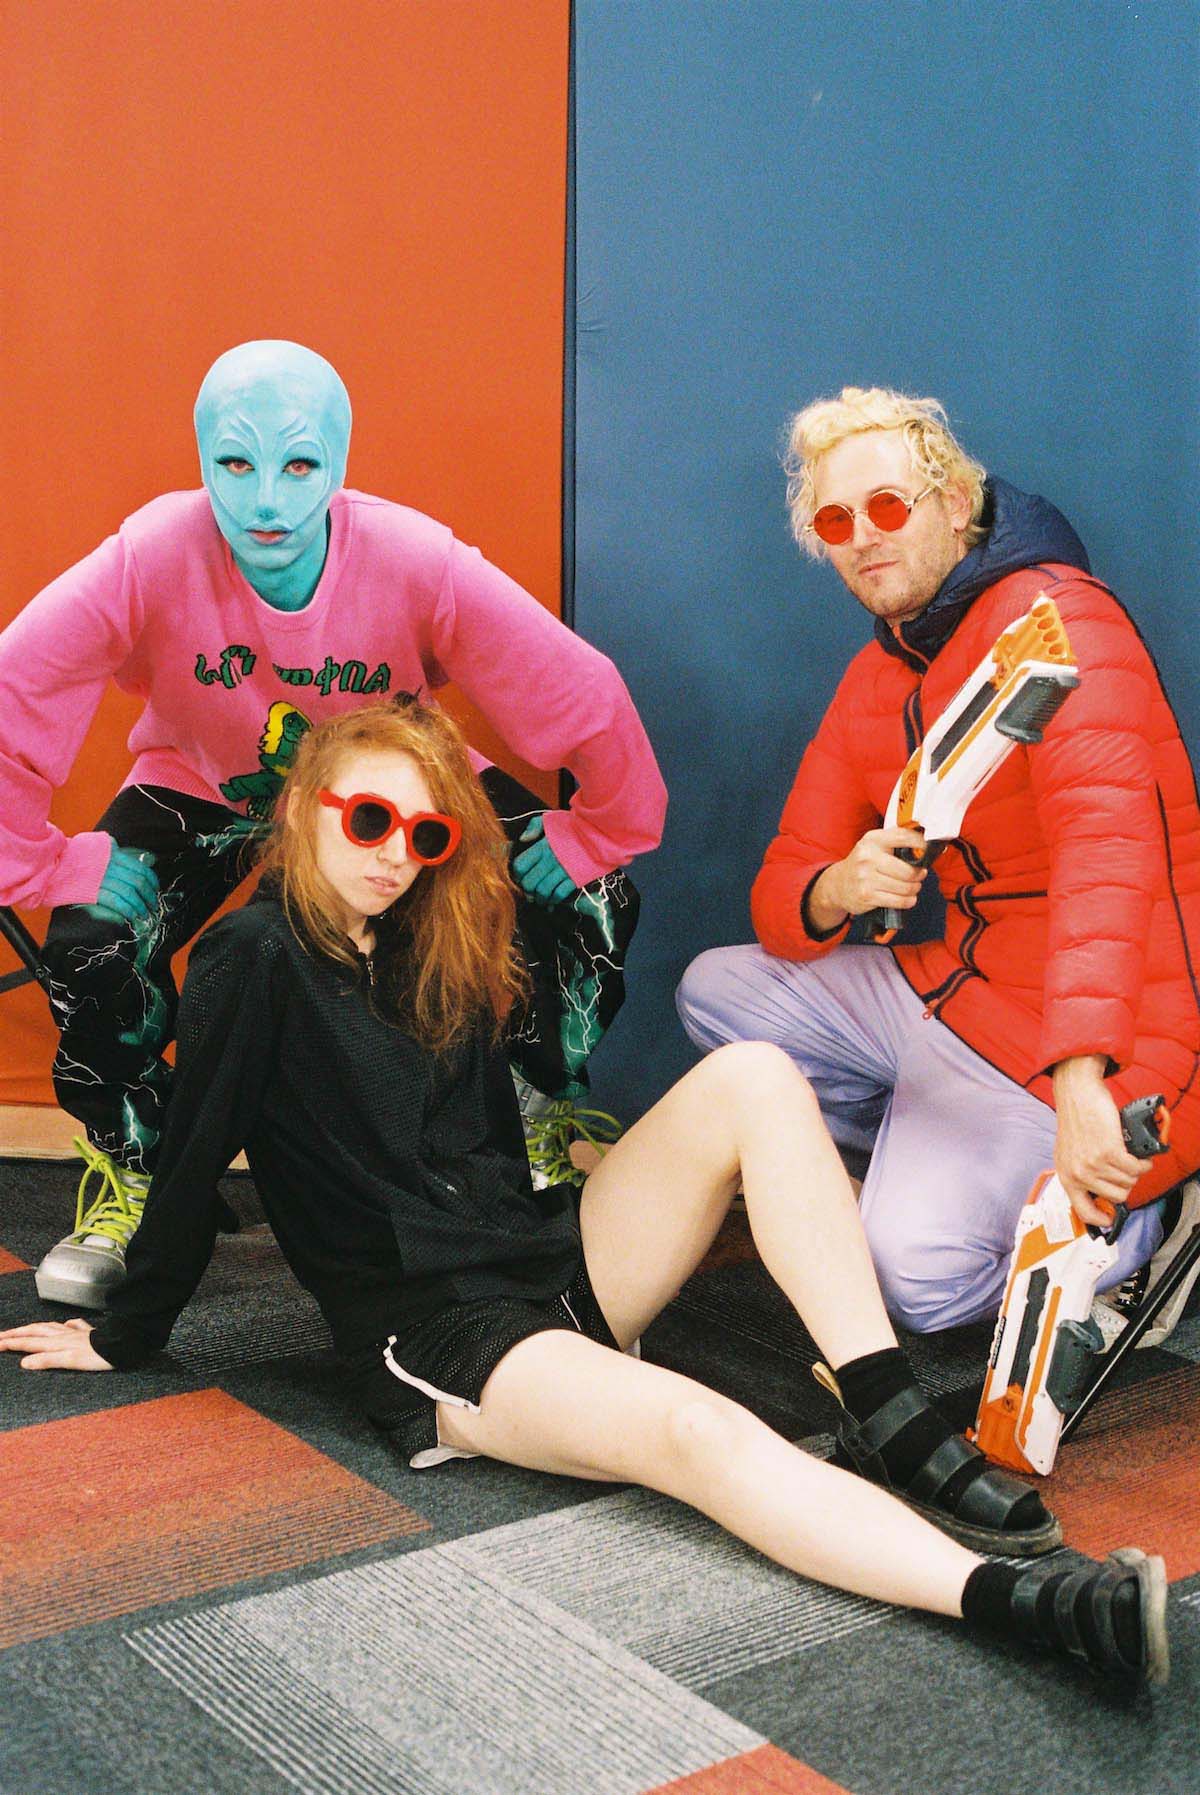 Three people, two squatting, one sitting on the floor. One person wears blue, alien make-up. The other two - a man and a woman - wear sunglasses. The woman has long red hair, the man short blond hair. He has two so-called Nerf Guns in his hands.